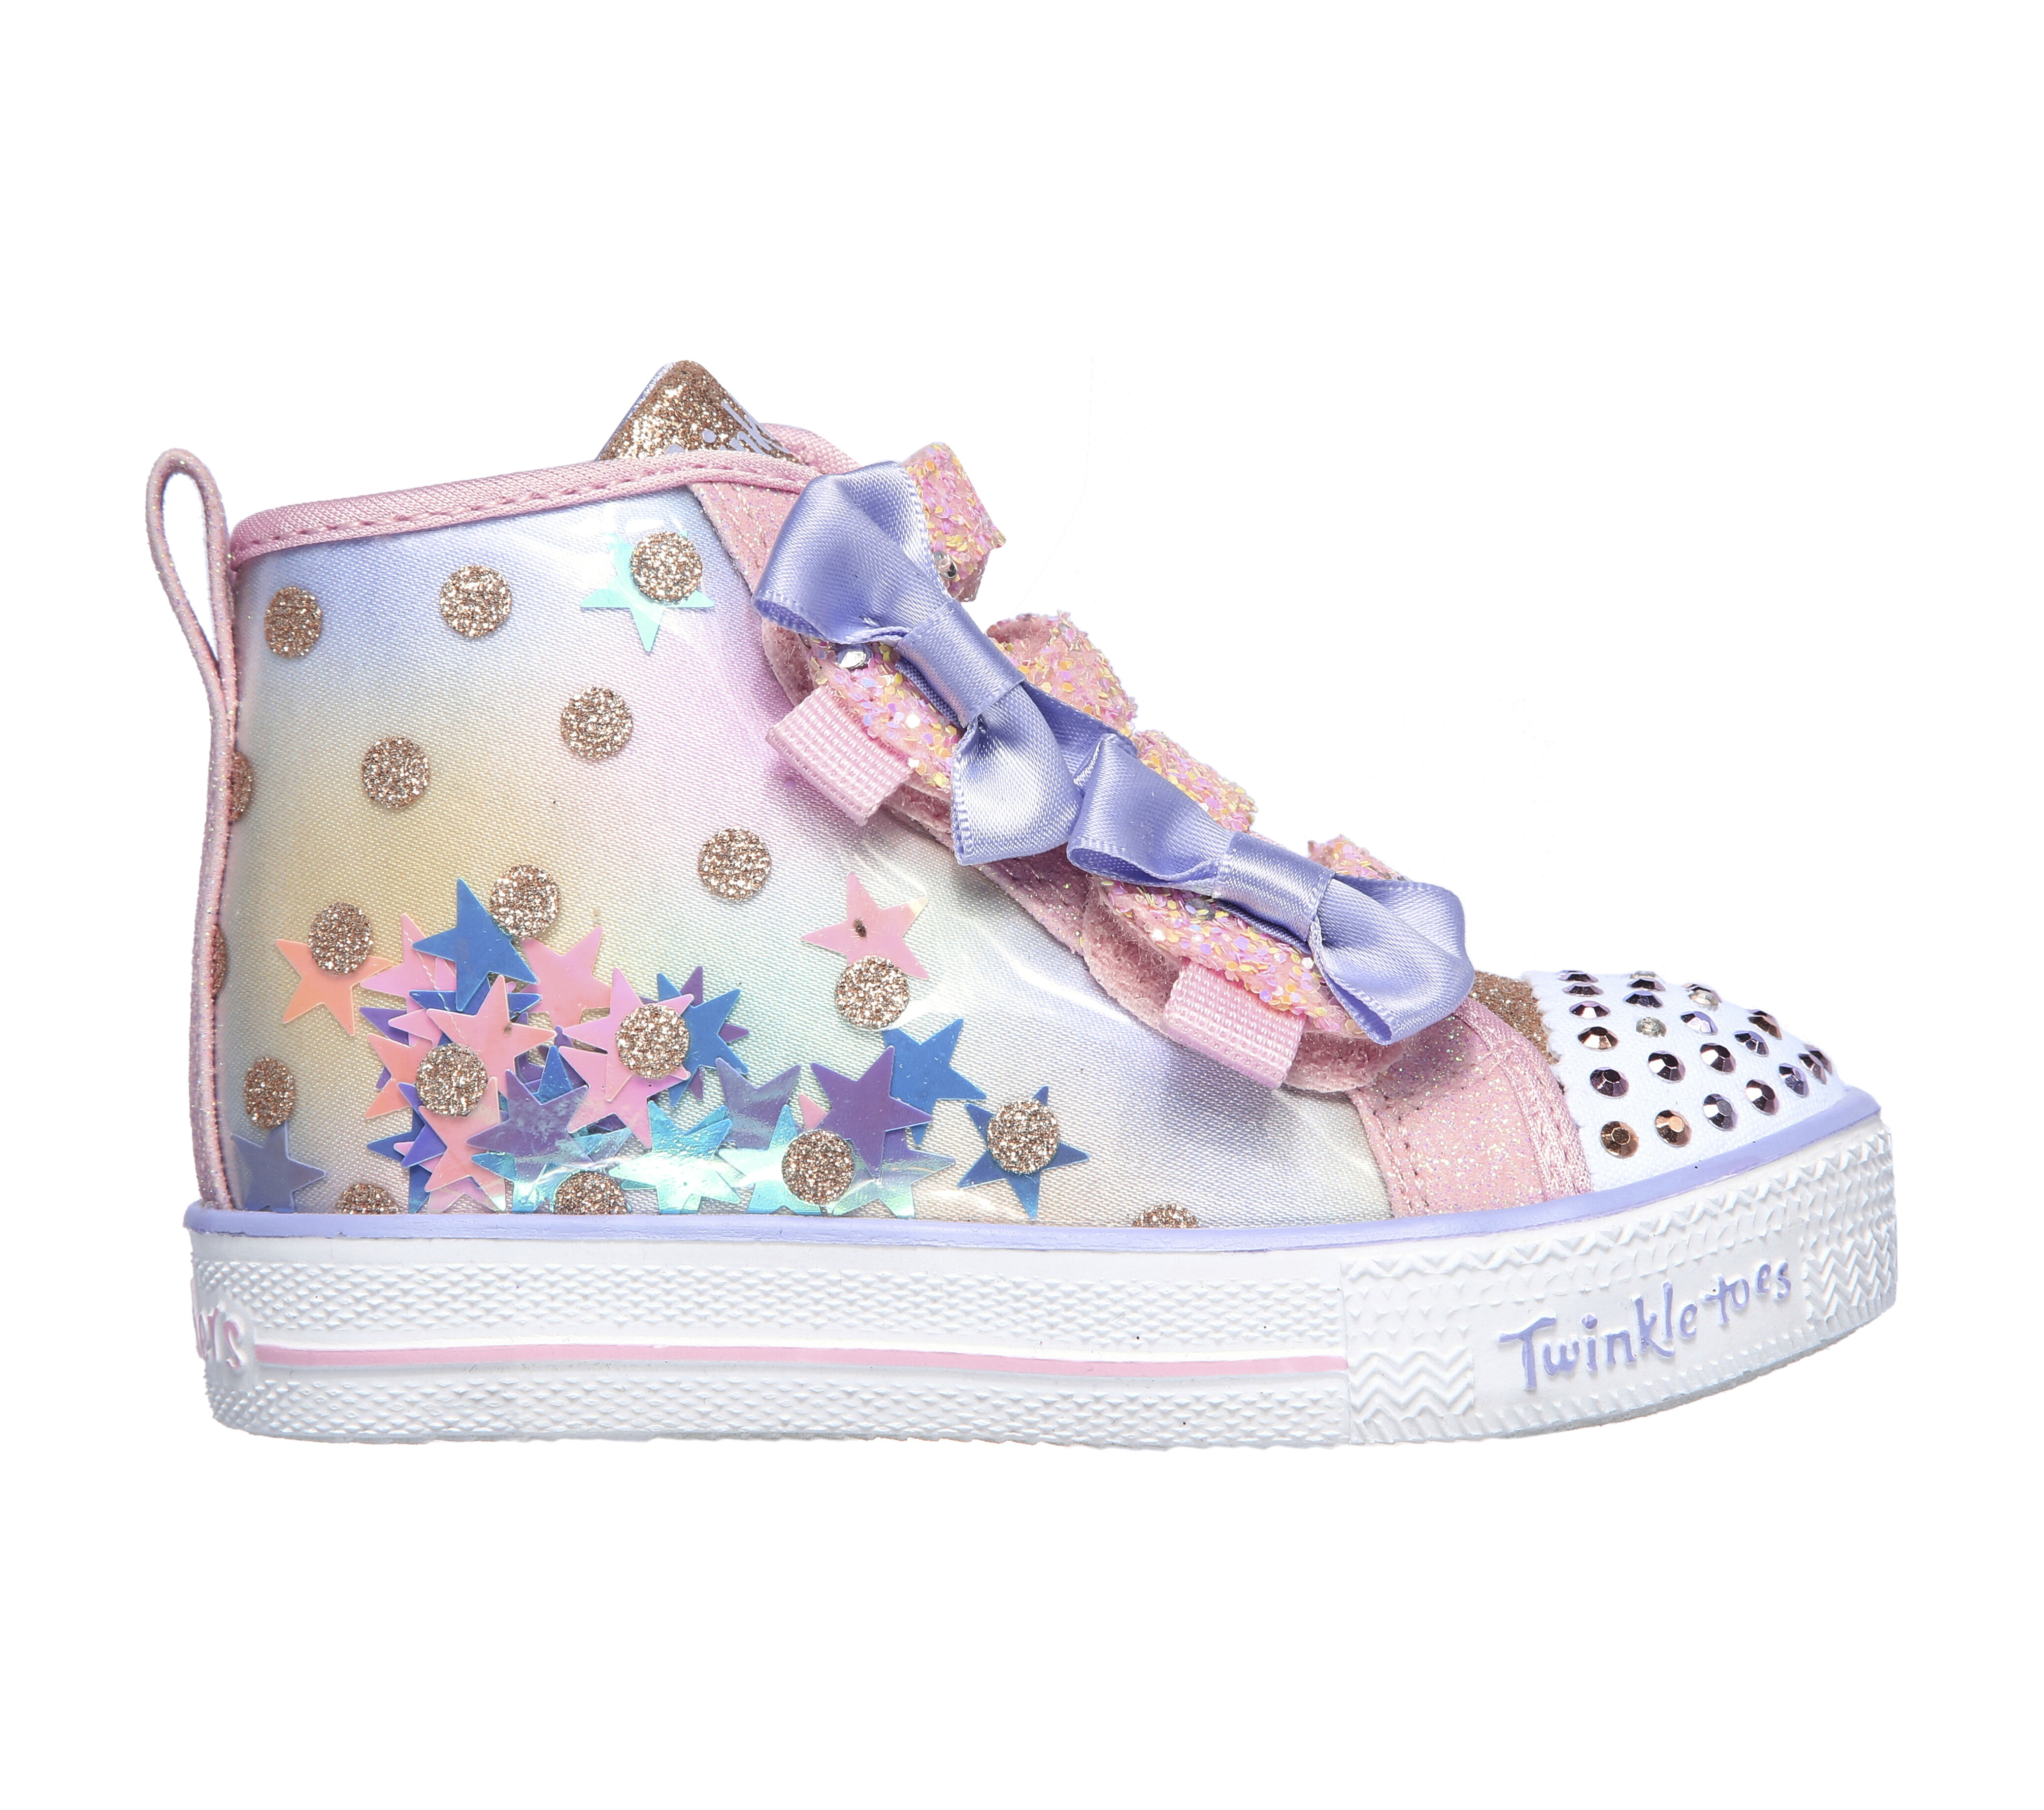 twinkle toe skating shoes neopets